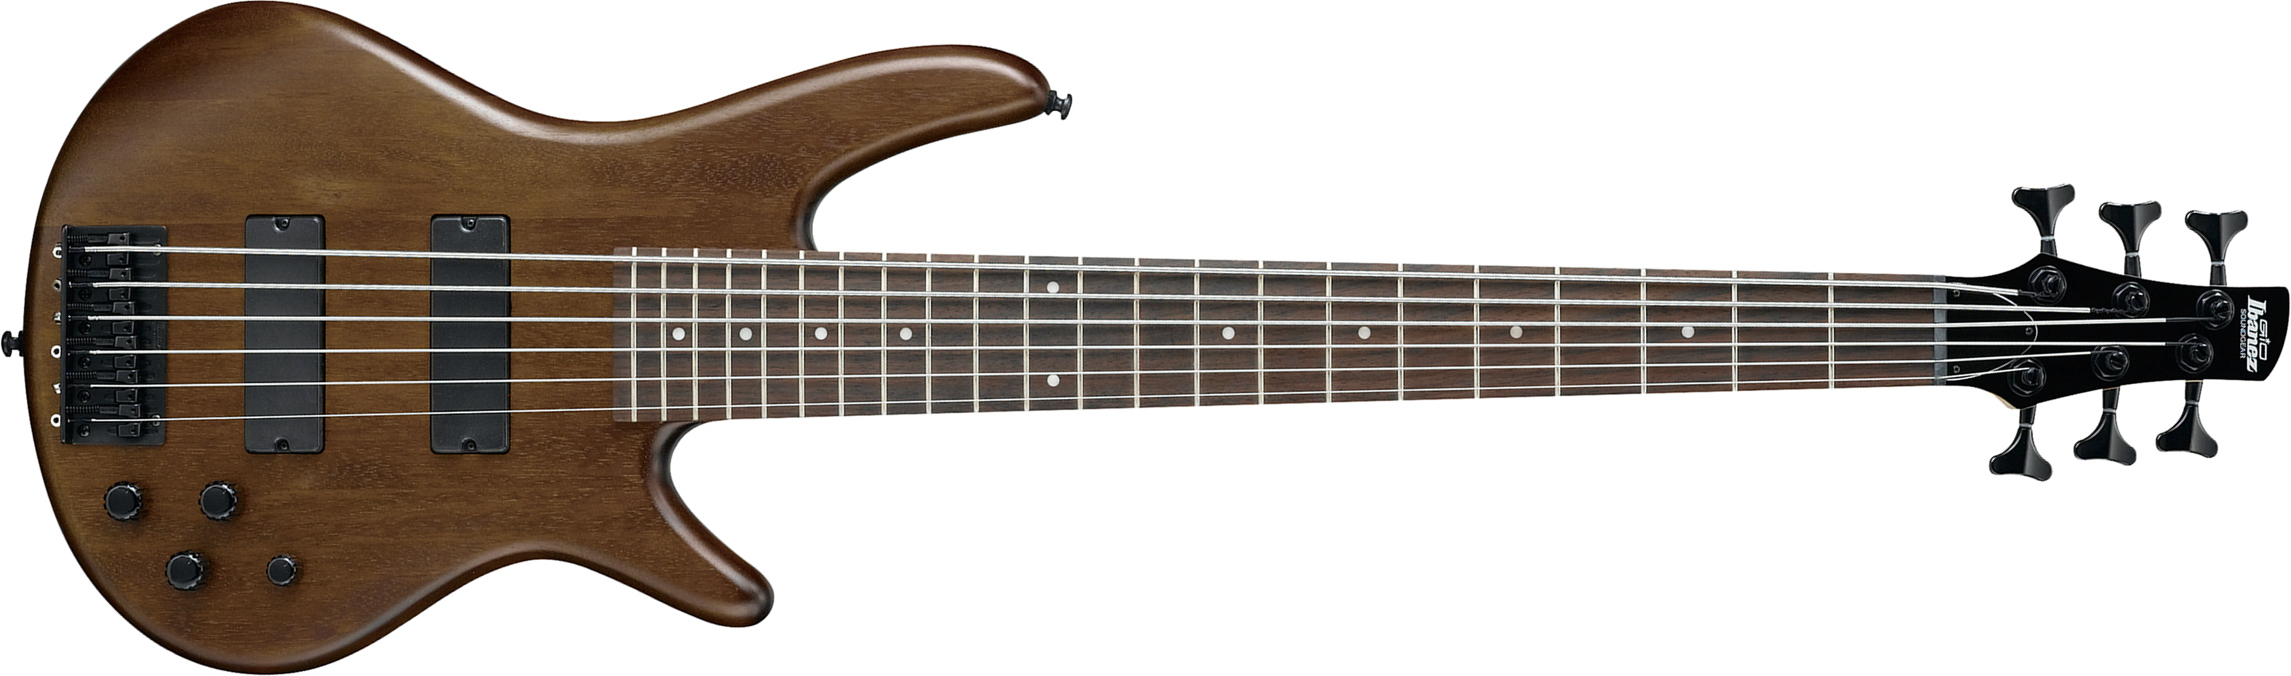 Ibanez Gsr206b Wnf Gio 6c Active Jat - Walnut Flat - Basse Électrique Solid Body - Main picture